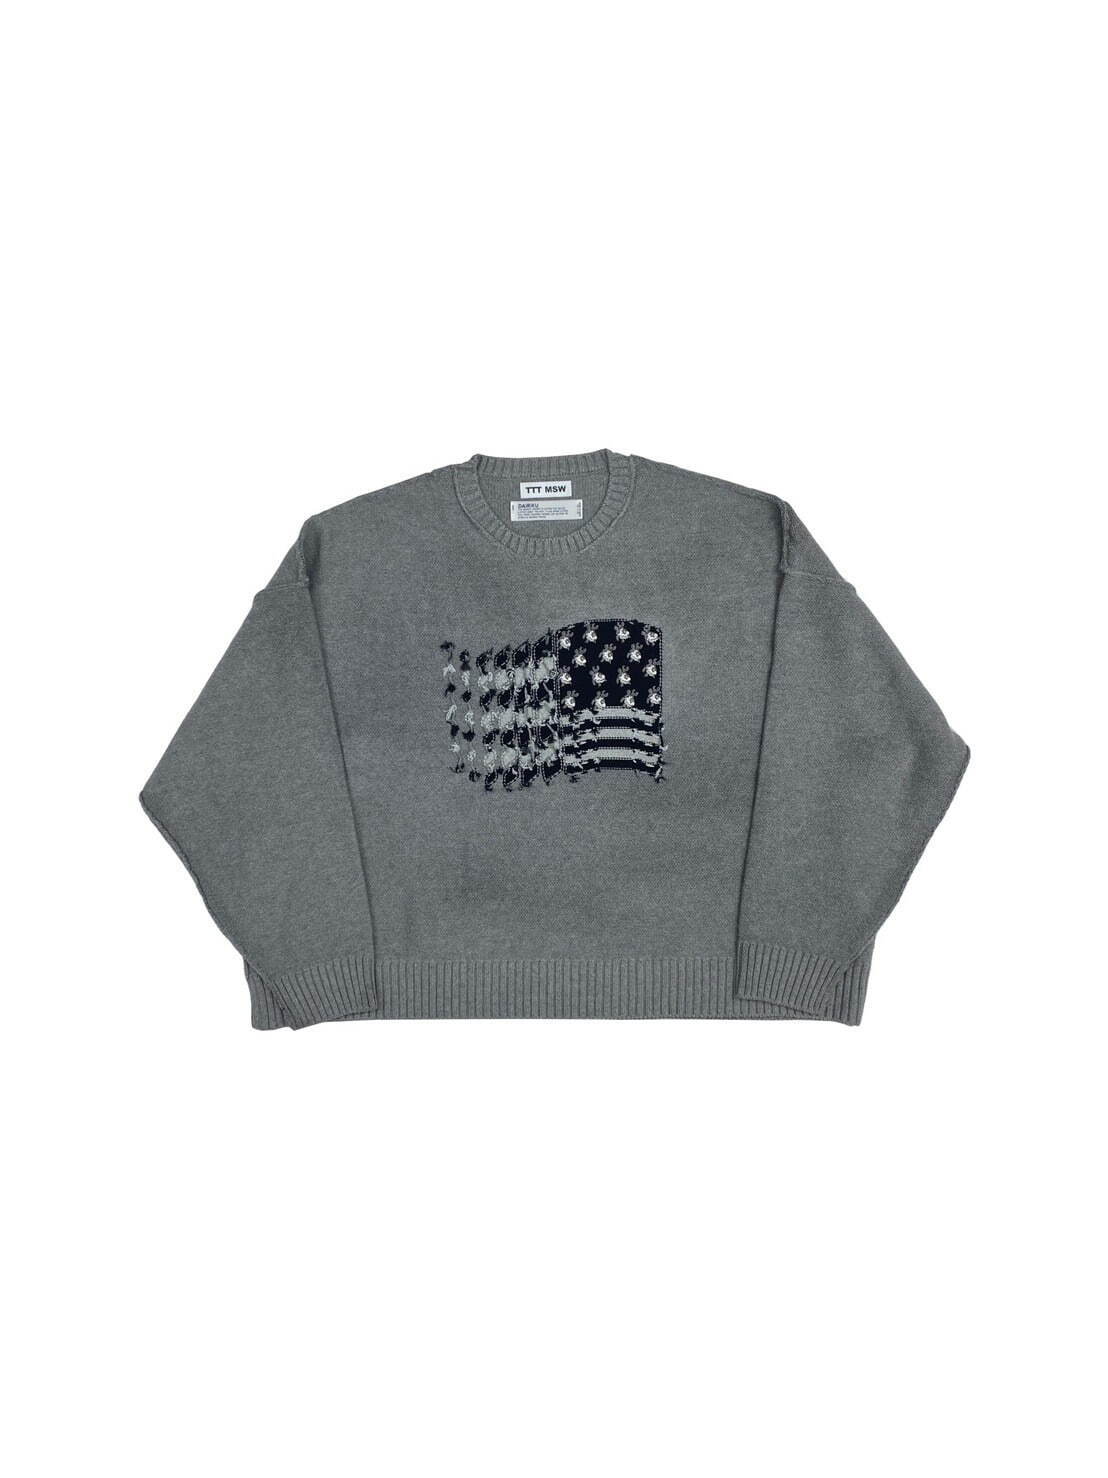 American Pullover Knit with Flower(GREY)
39,600円